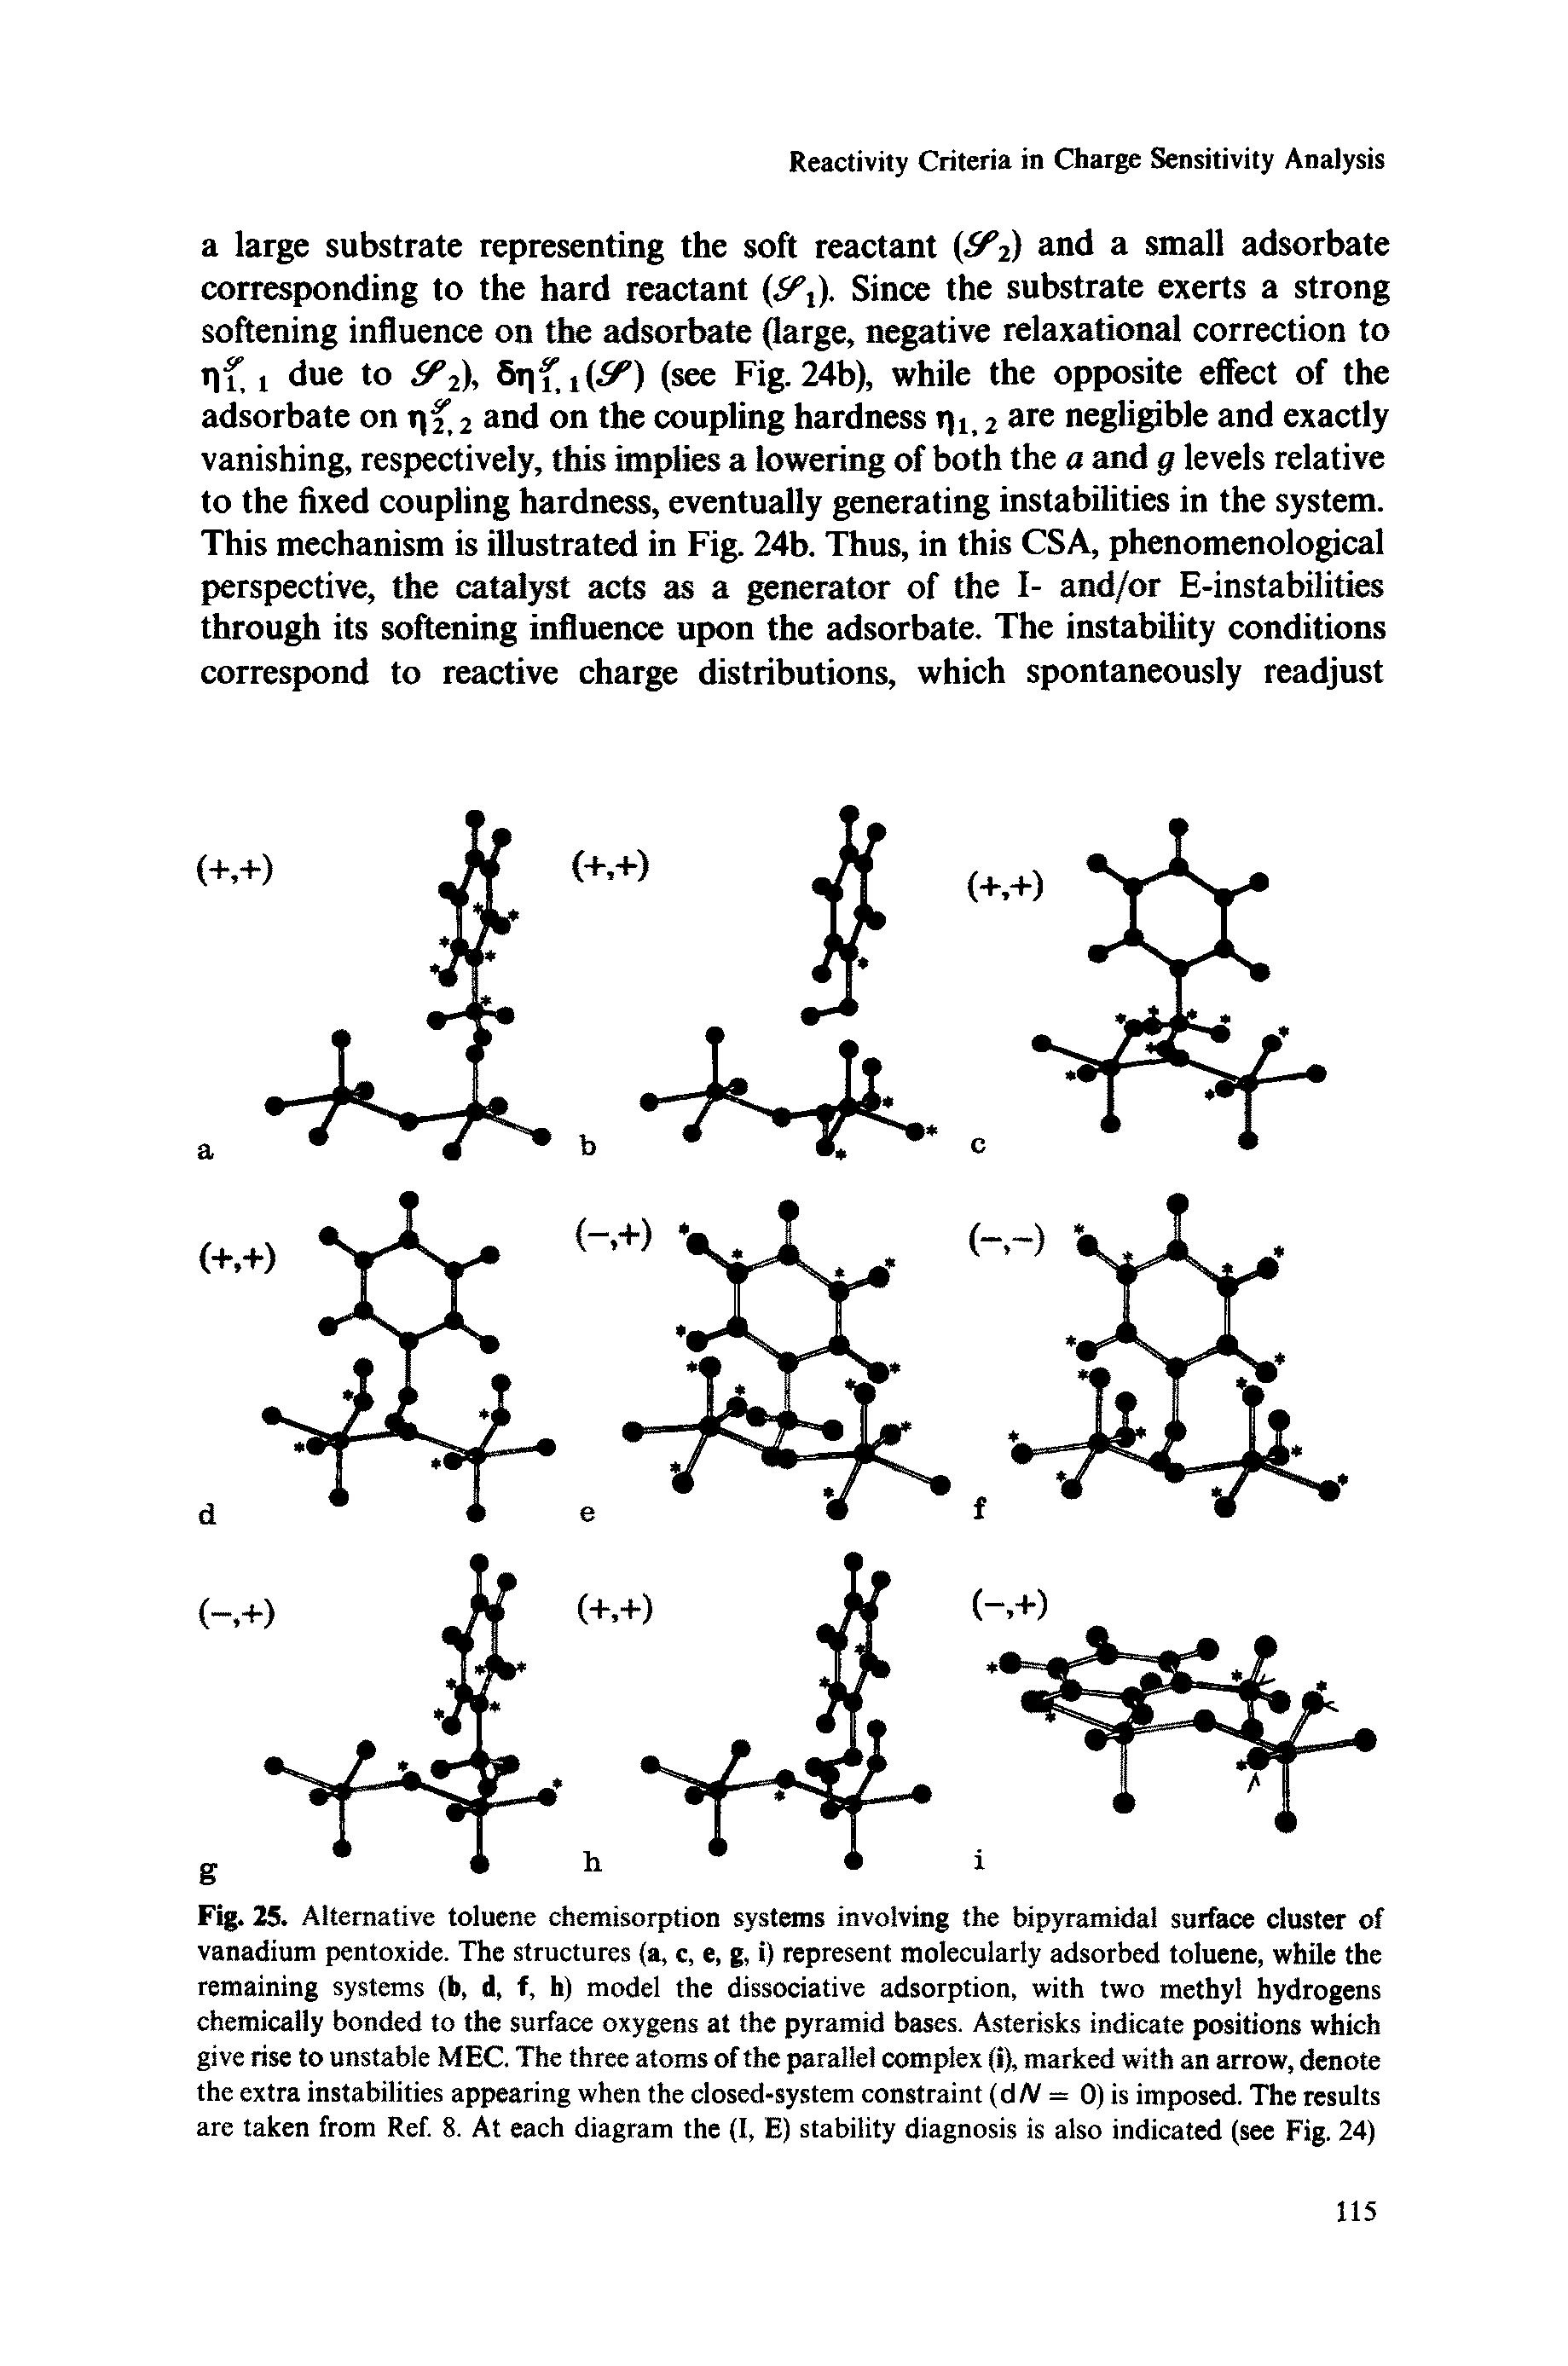 Fig. 25. A1 ternative toluene chemisorption systems involving the bipyramidal surface cluster of vanadium pentoxide. The structures (a, c, e, g, i) represent molecularly adsorbed toluene, while the remaining systems (b, d, f, h) model the dissociative adsorption, with two methyl hydrogens chemically bonded to the surface oxygens at the pyramid bases. Asterisks indicate positions which give rise to unstable MEC. The three atoms of the parallel complex (i), marked with an arrow, denote the extra instabilities appearing when the closed-system constraint (d N = 0) is imposed. The results are taken from Ref. 8. At each diagram the (I, E) stability diagnosis is also indicated (see Fig. 24)...